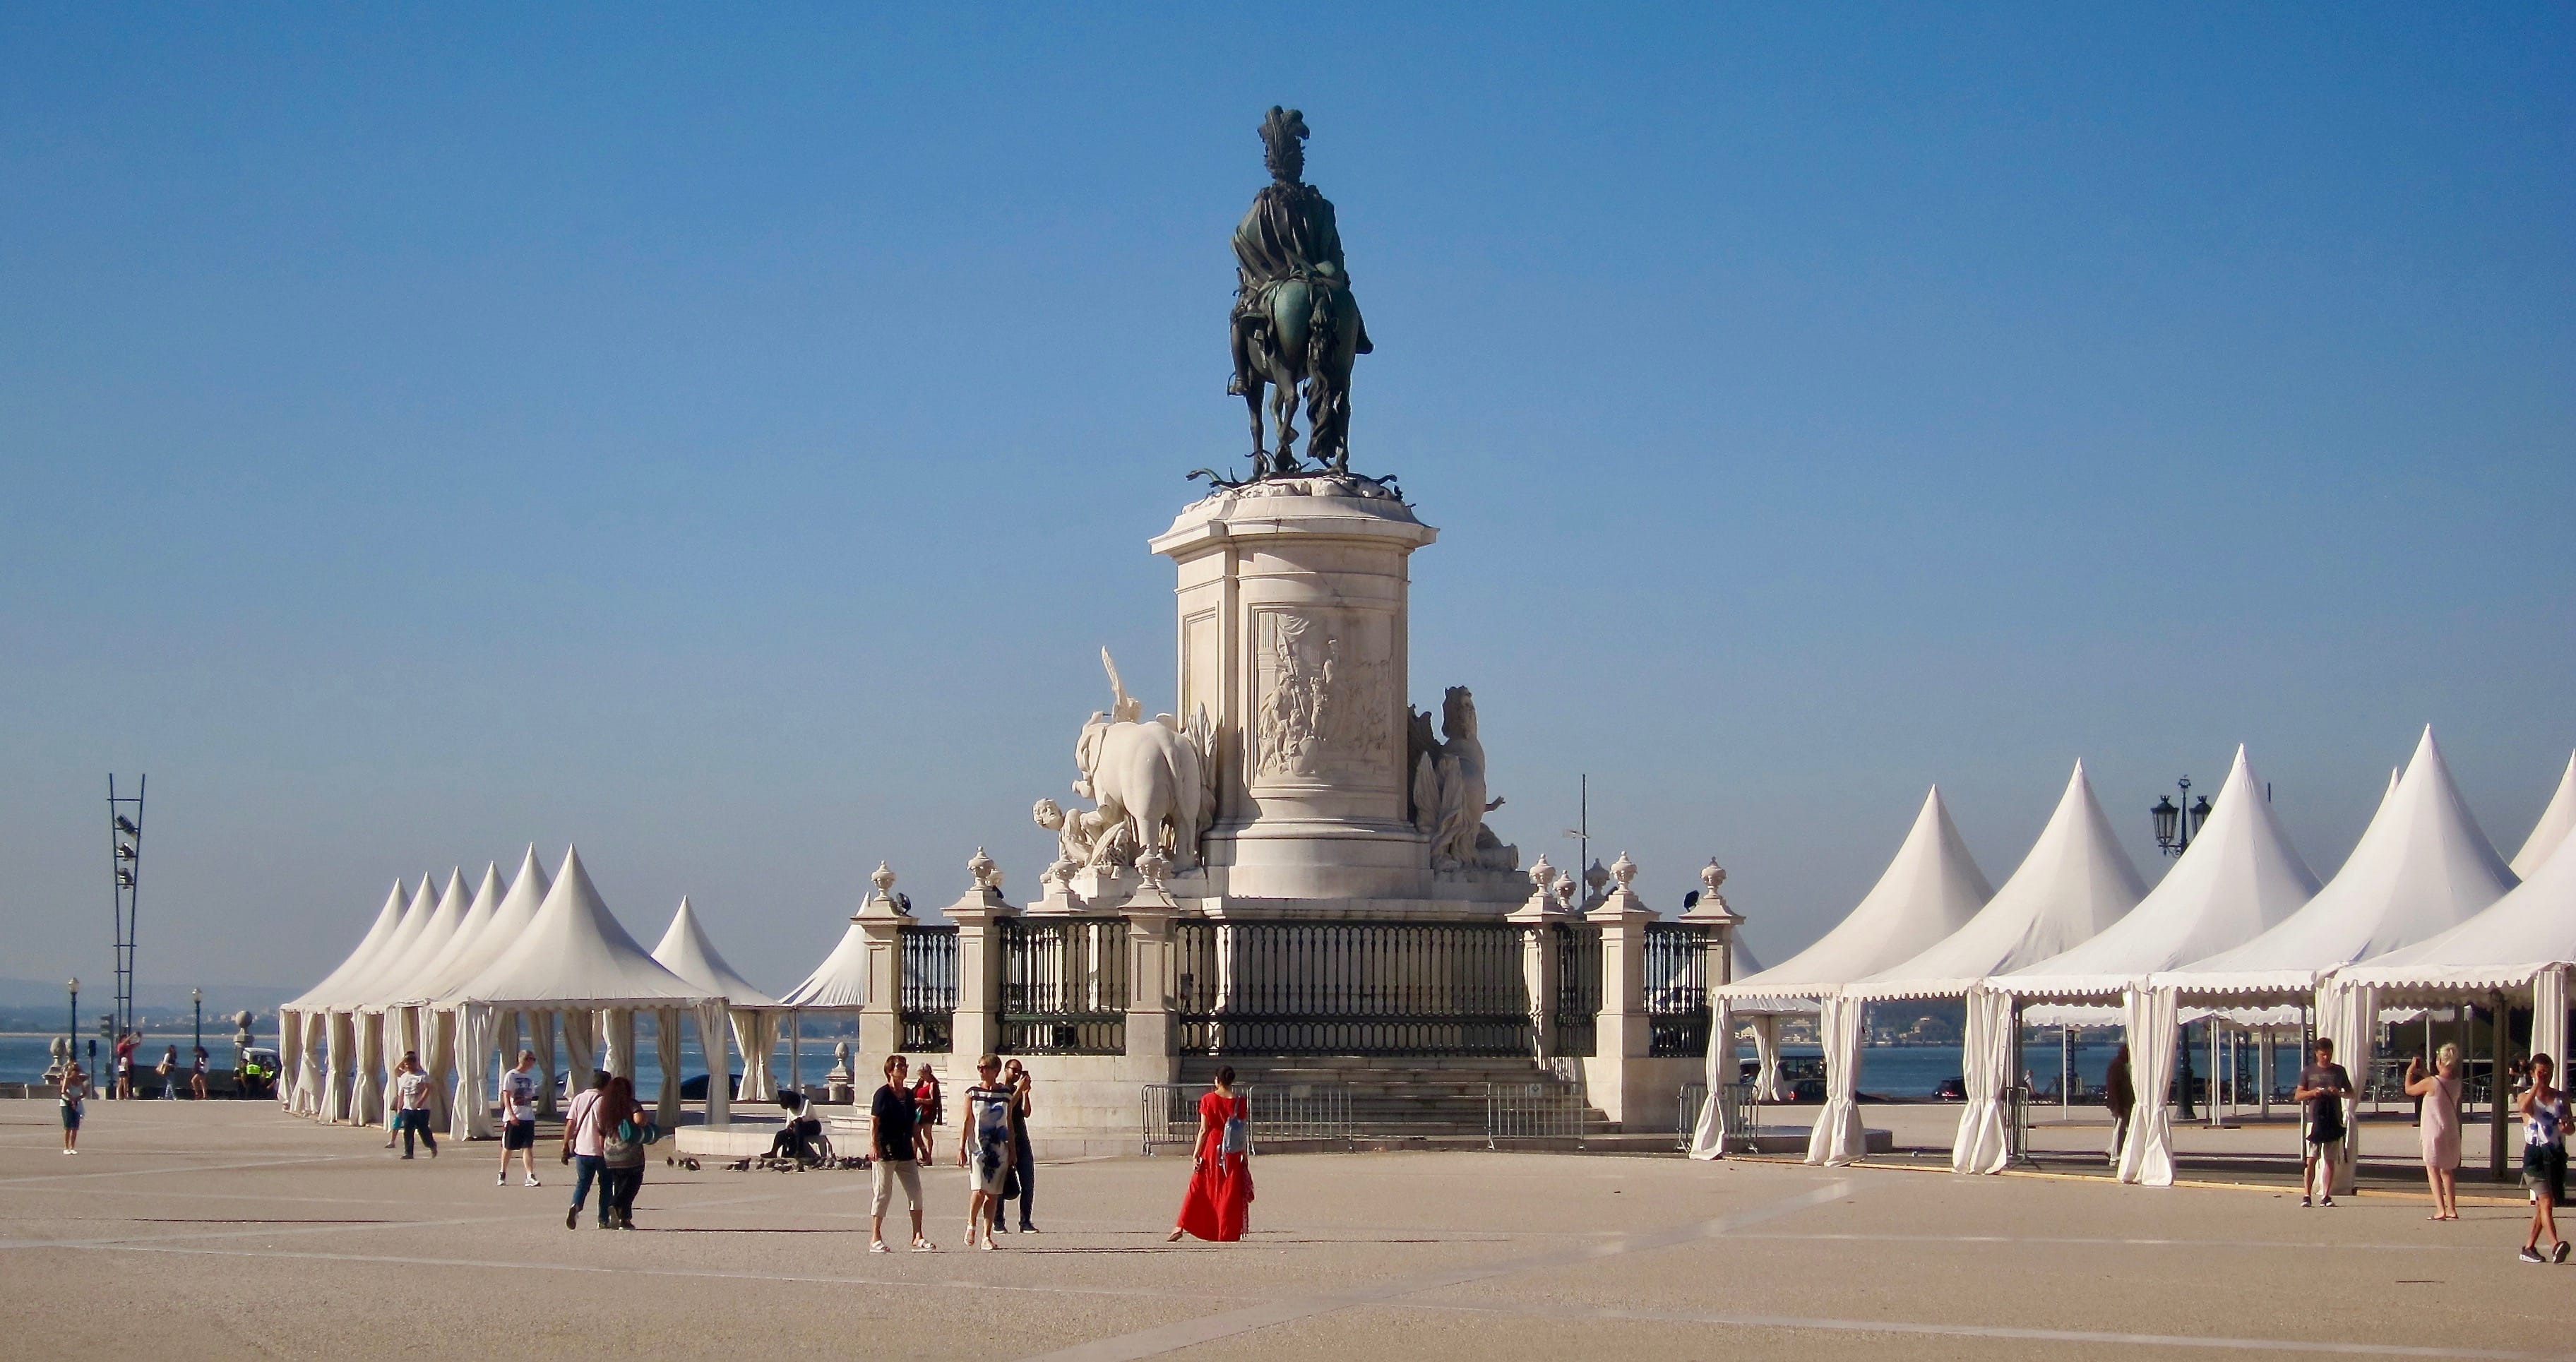 a large square with tented stalls. A woman in a red dress stands before the statue at its center